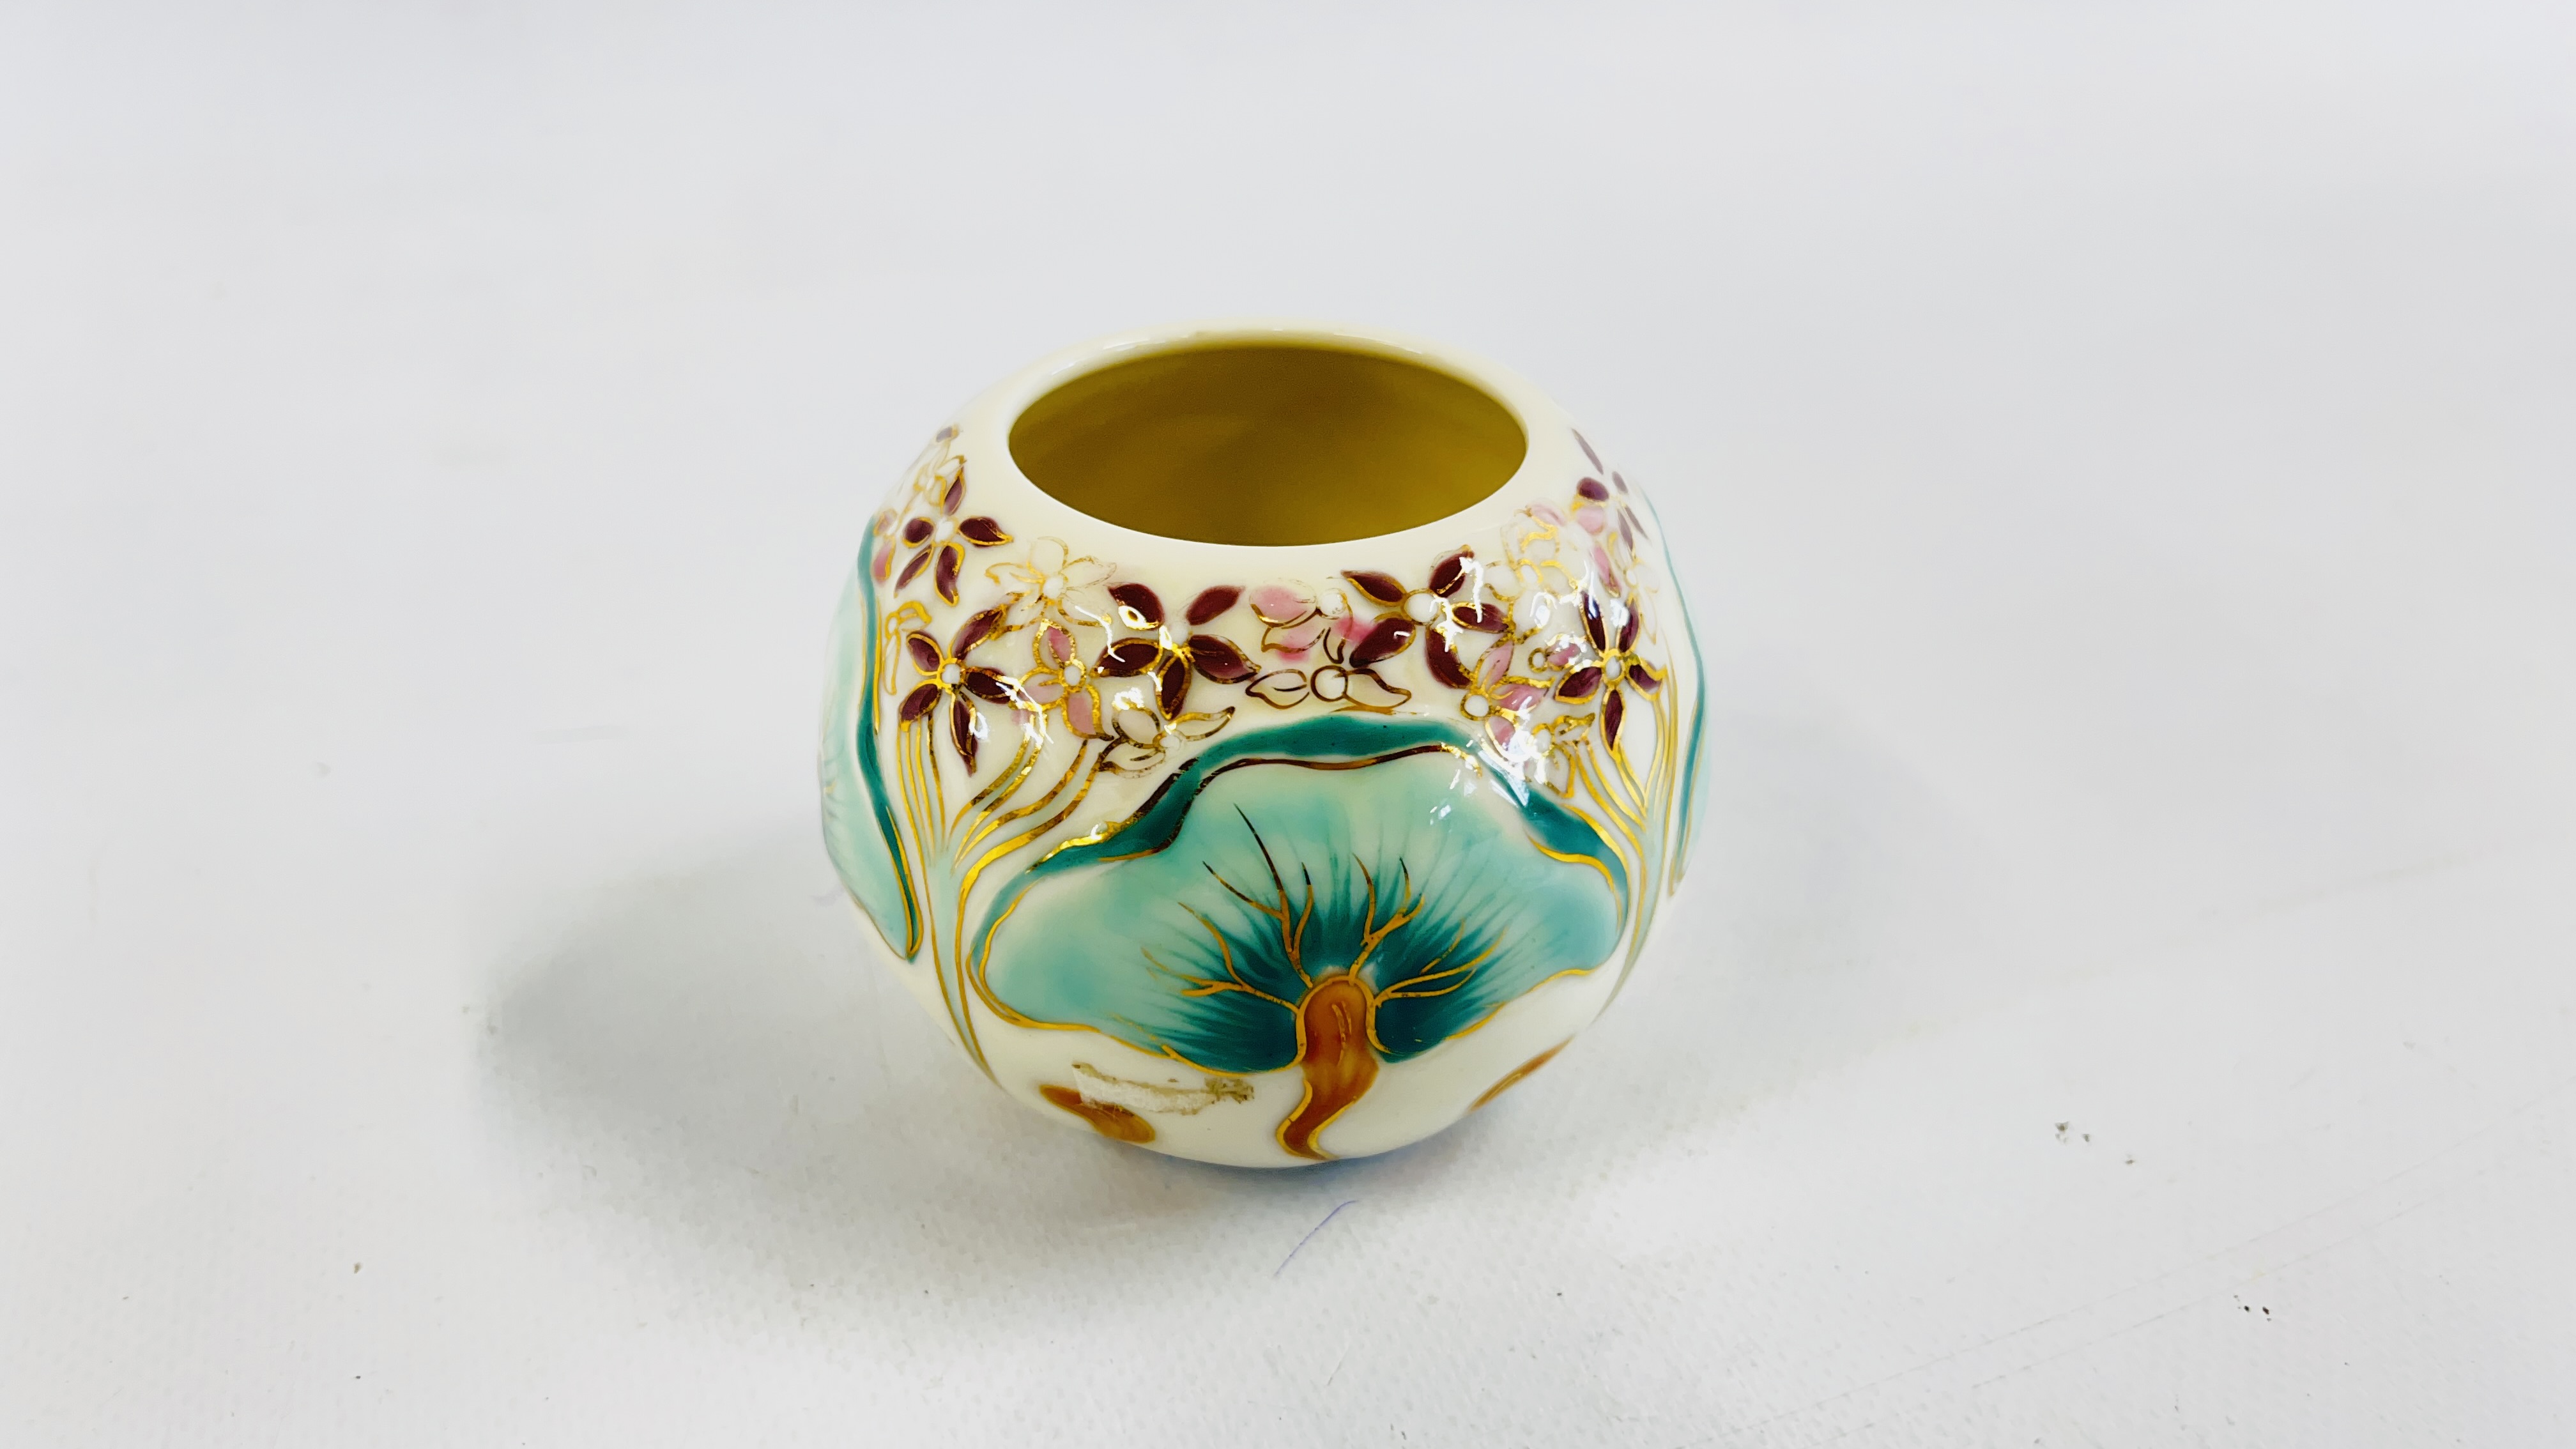 A VINTAGE "ZSOLNAY.HUNGARY" HAND PAINTED PORCELAIN VASE 72561A 113 DEPICTING MUSHROOMS H 6.5CM.